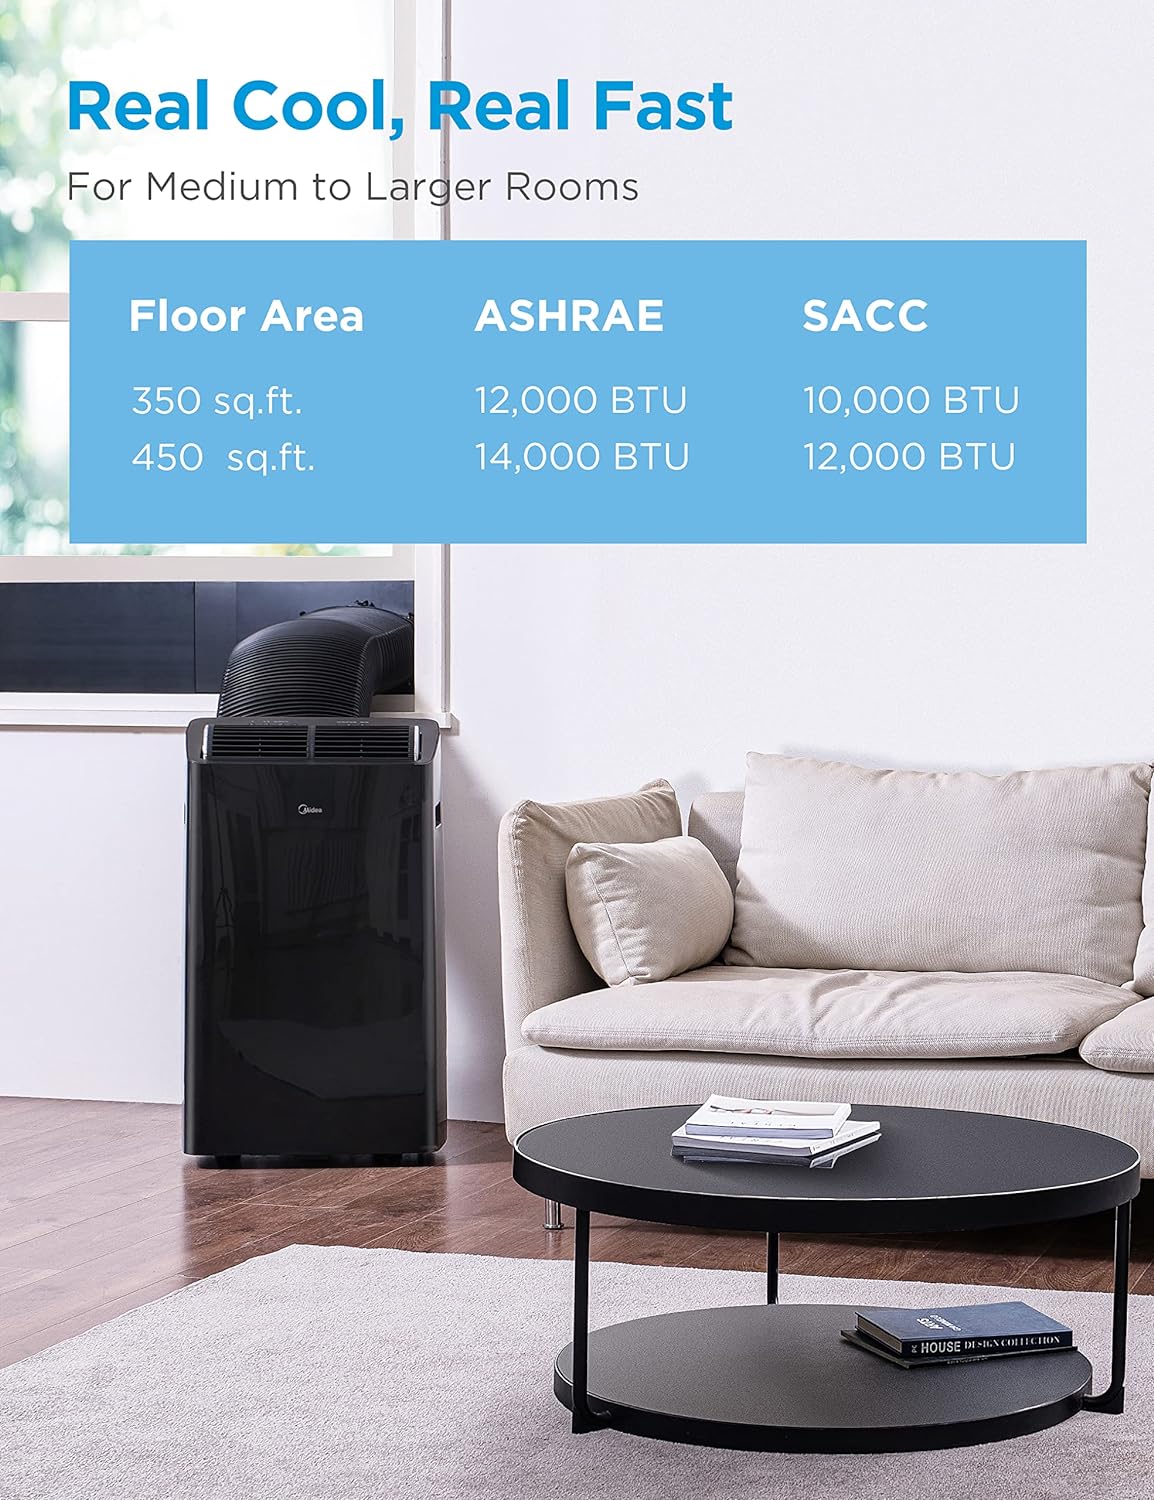 NEW - Midea Duo 14,000 BTU (12,000 BTU SACC) High Efficiency Inverter Ultra Quiet Portable Air Conditioner,with Heat up to 550 Sq. Ft., Works with Alexa/Google Assistant, with Remote Control & Window Kit - Retail $699